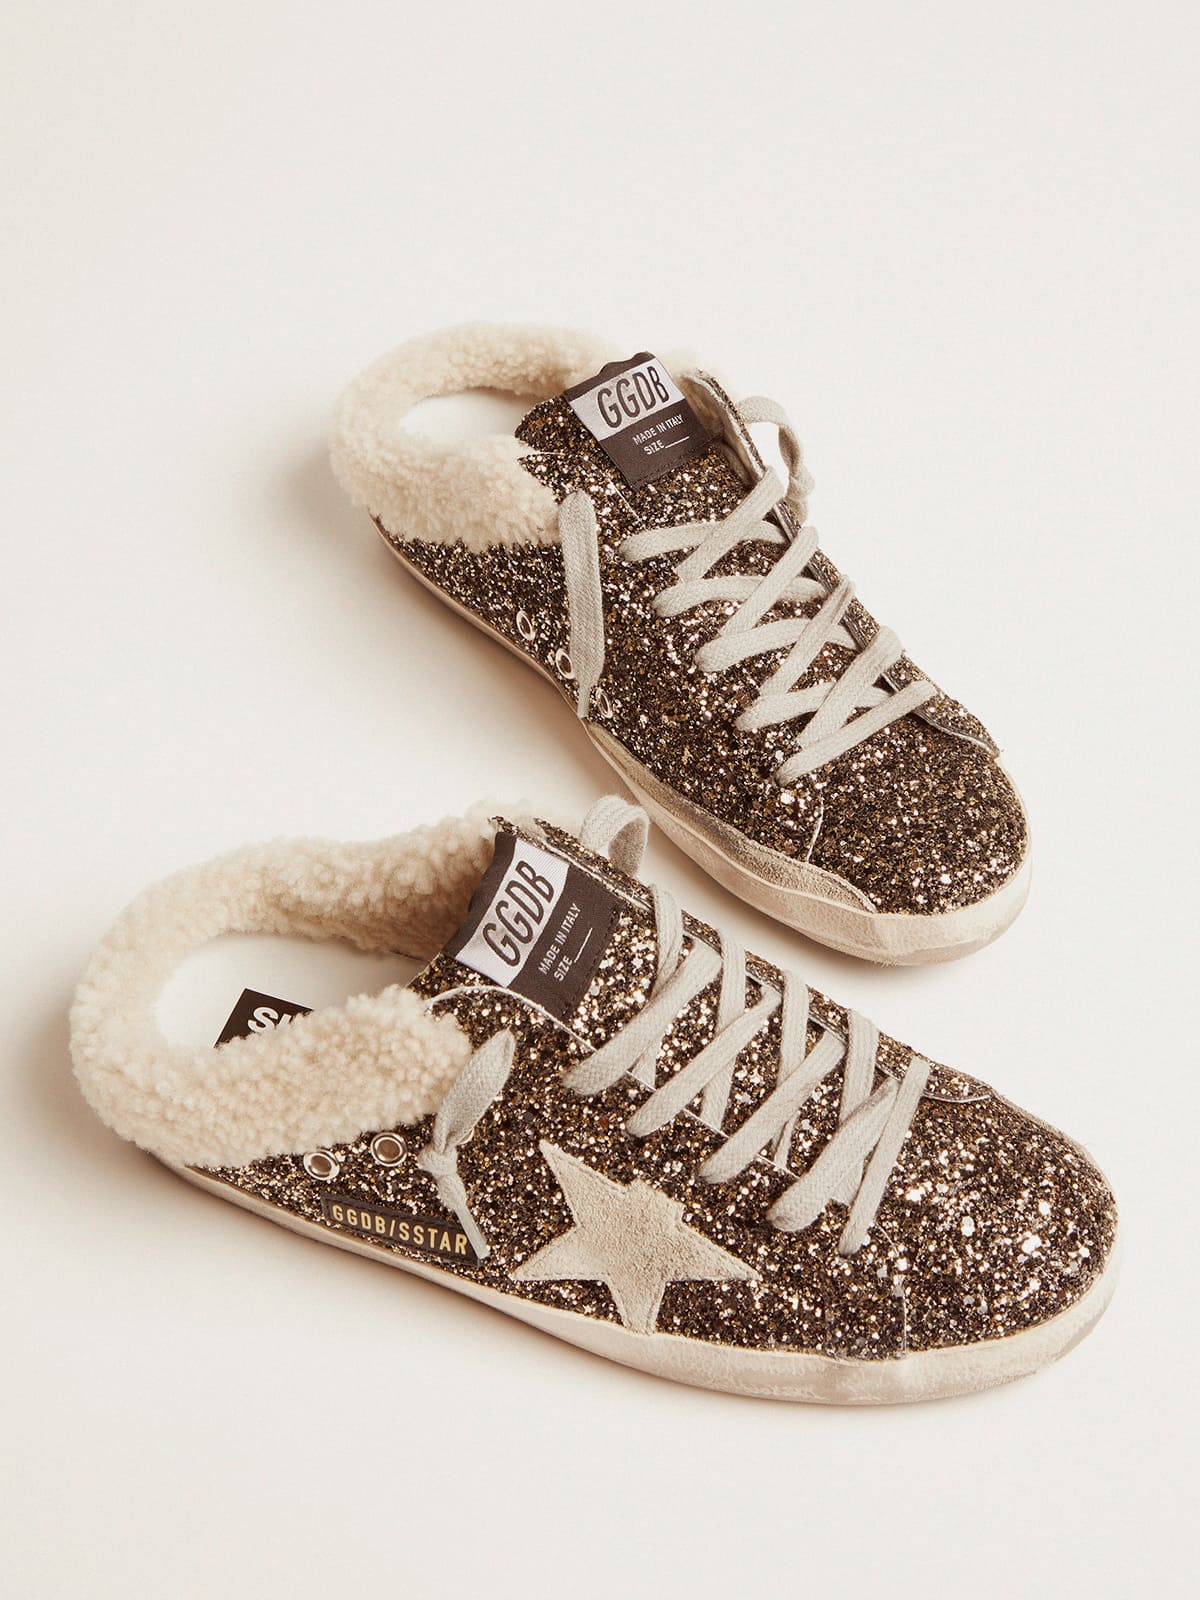 Women's Super-Star Sabot with glitter and shearling interior | Golden Goose